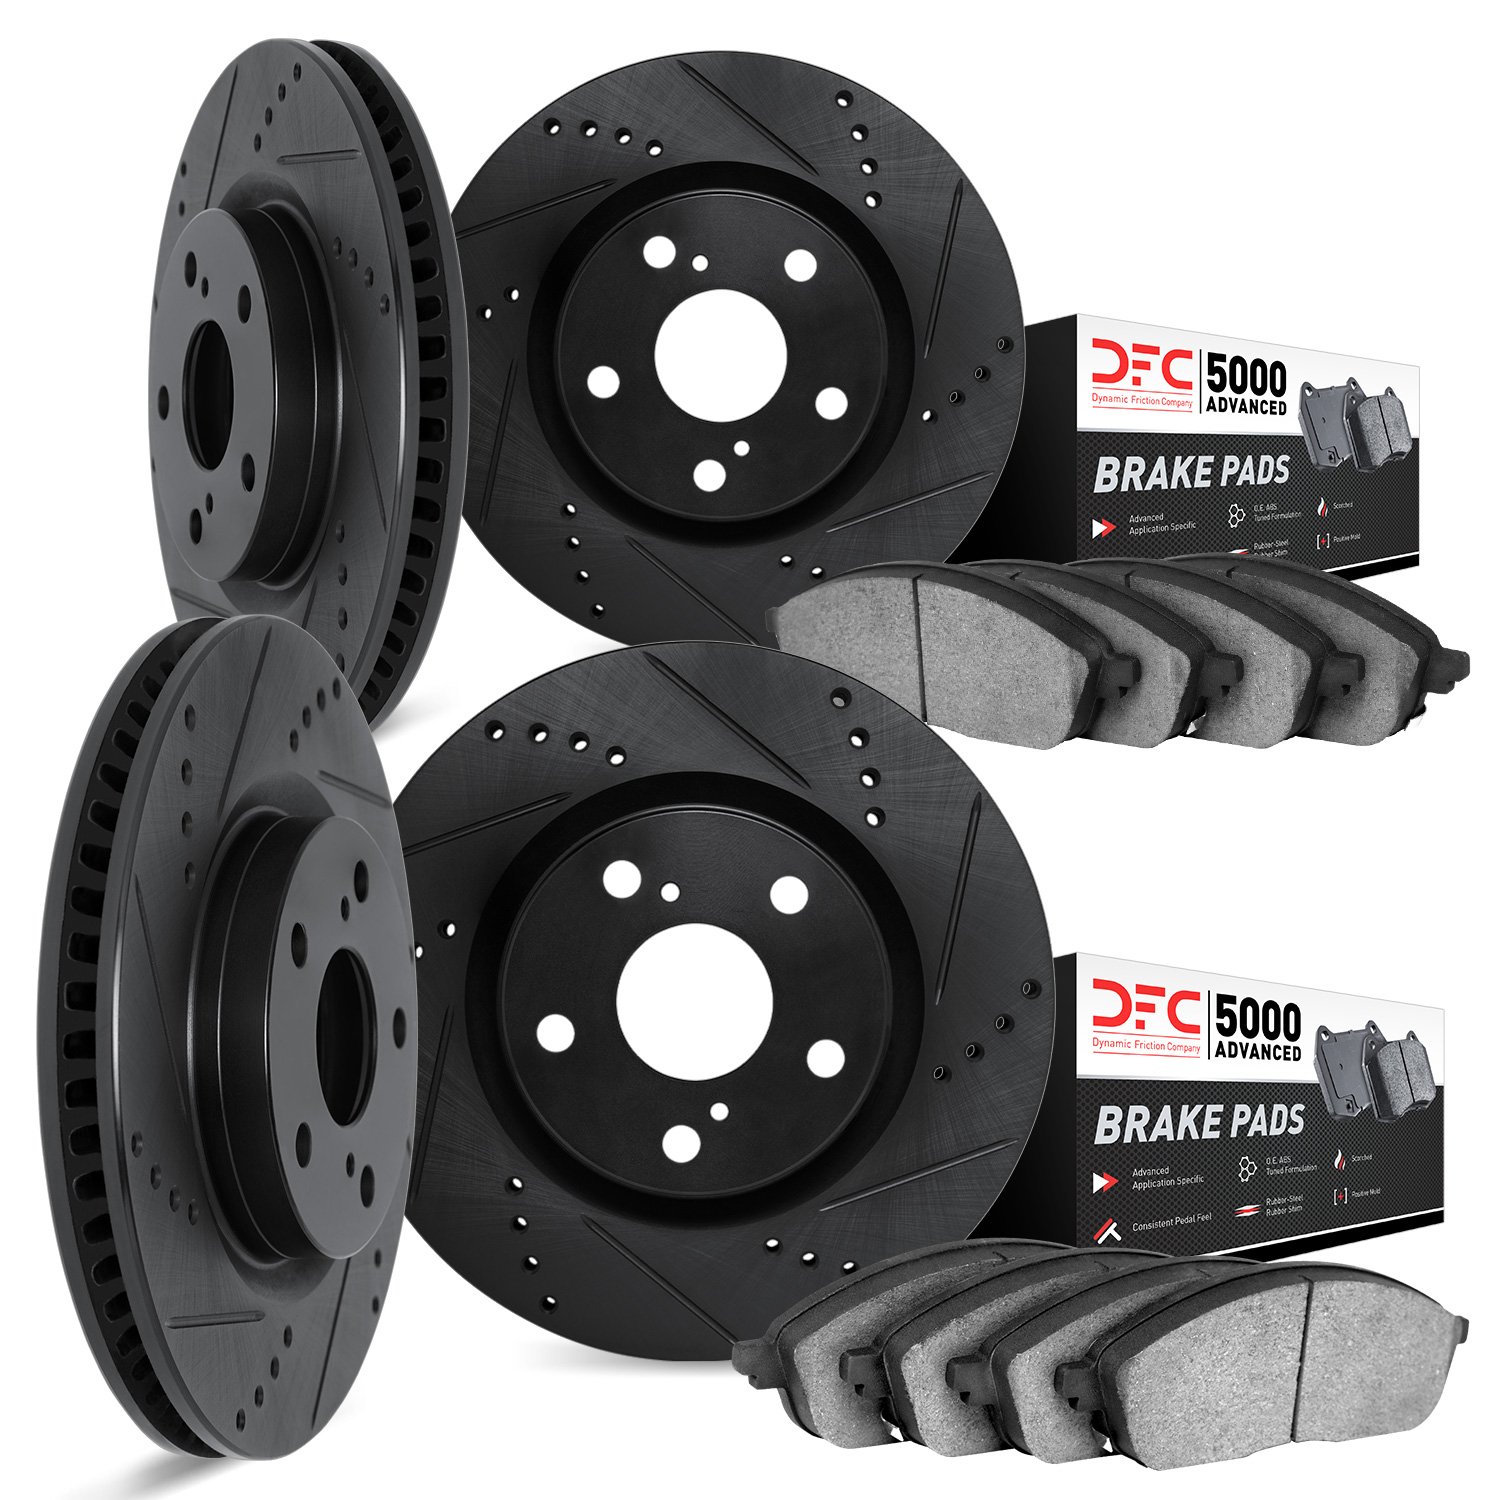 8504-73010 Drilled/Slotted Brake Rotors w/5000 Advanced Brake Pads Kit [Black], Fits Select Audi/Volkswagen, Position: Front and